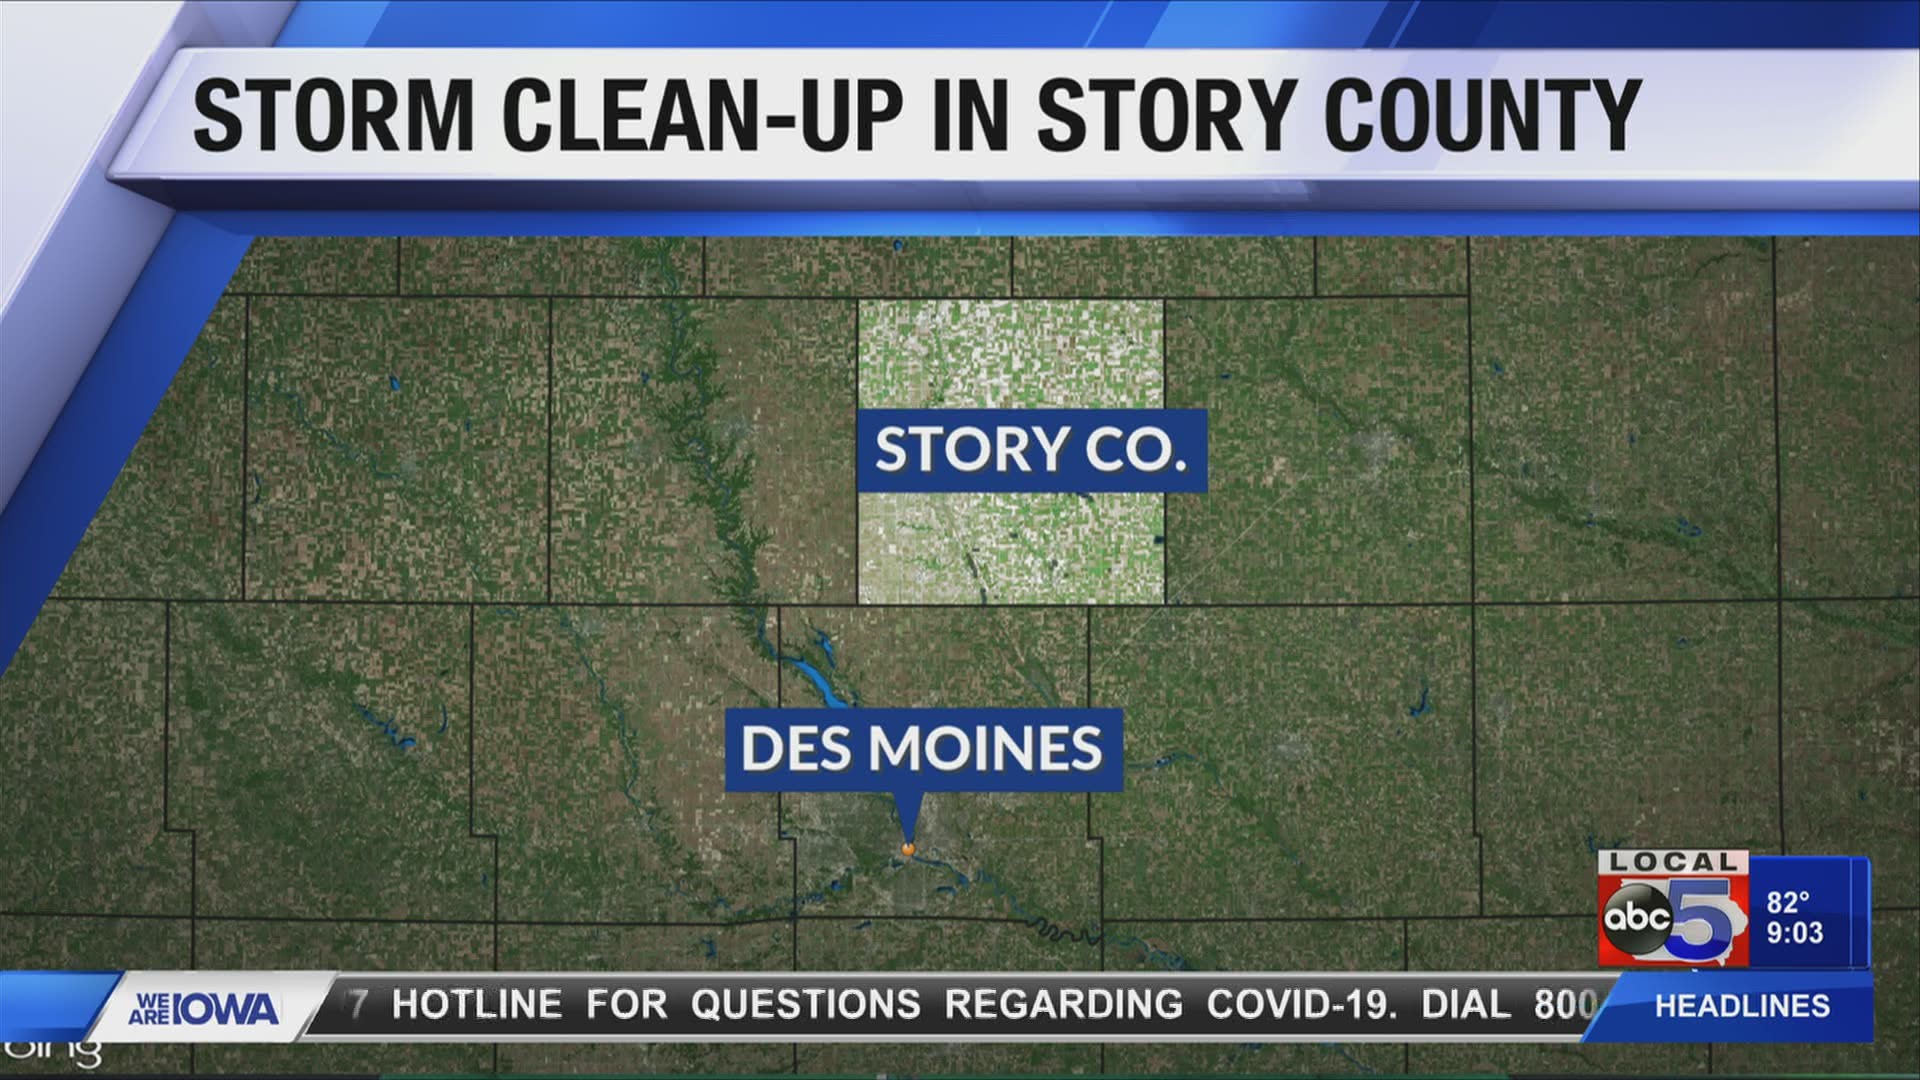 There is a call for volunteers to help with storm clean-up in Story County this weekend.